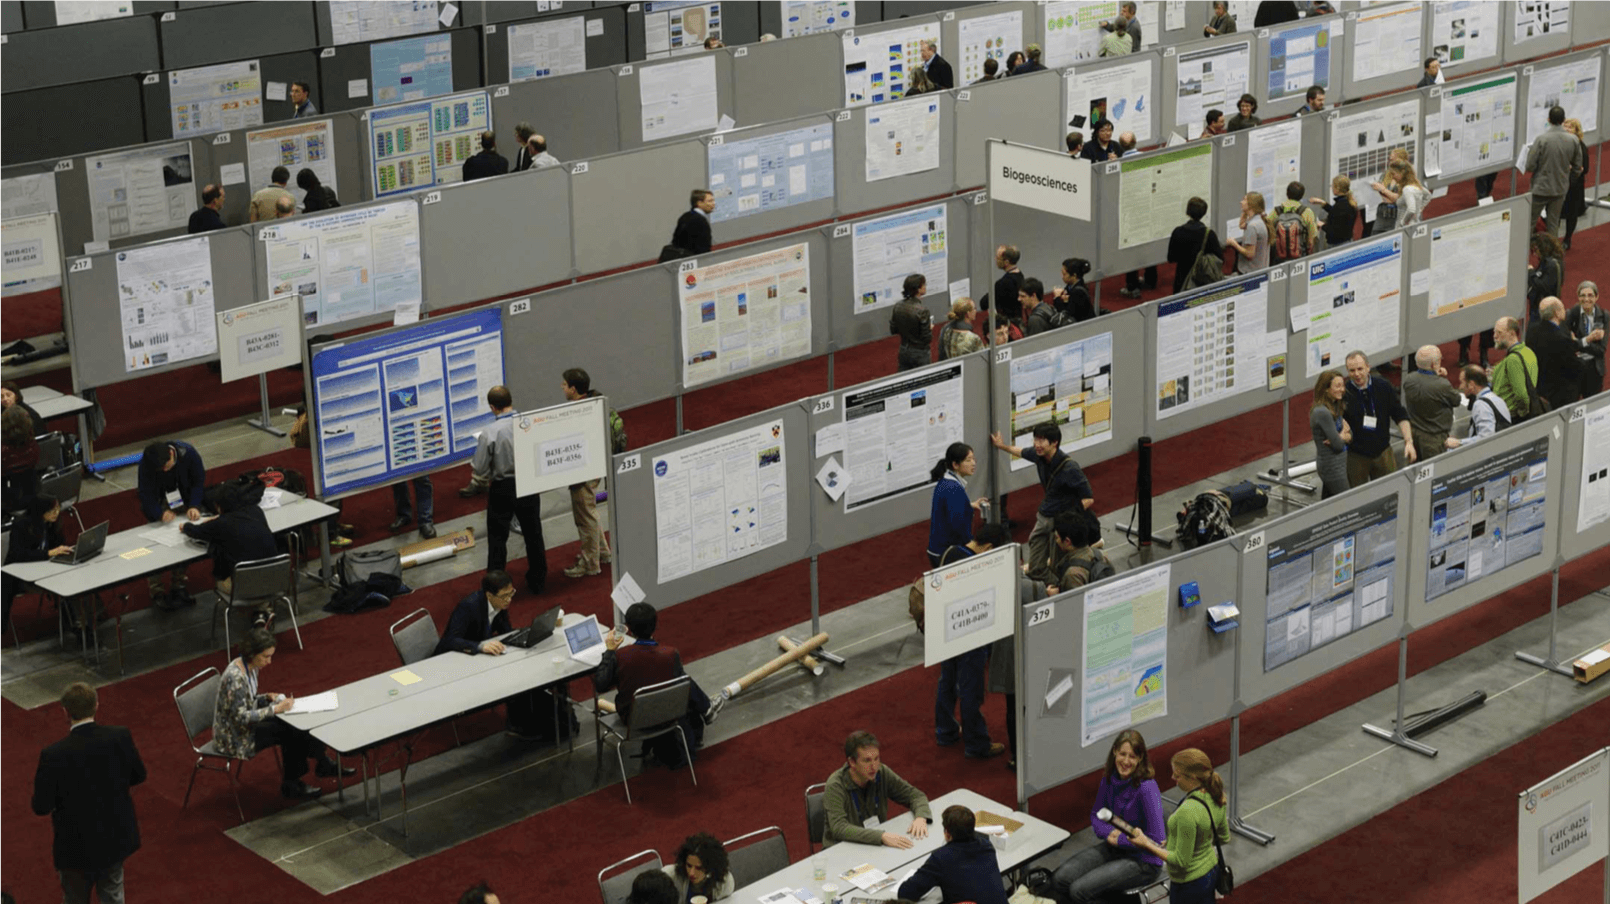 Birds eye view of poster board session